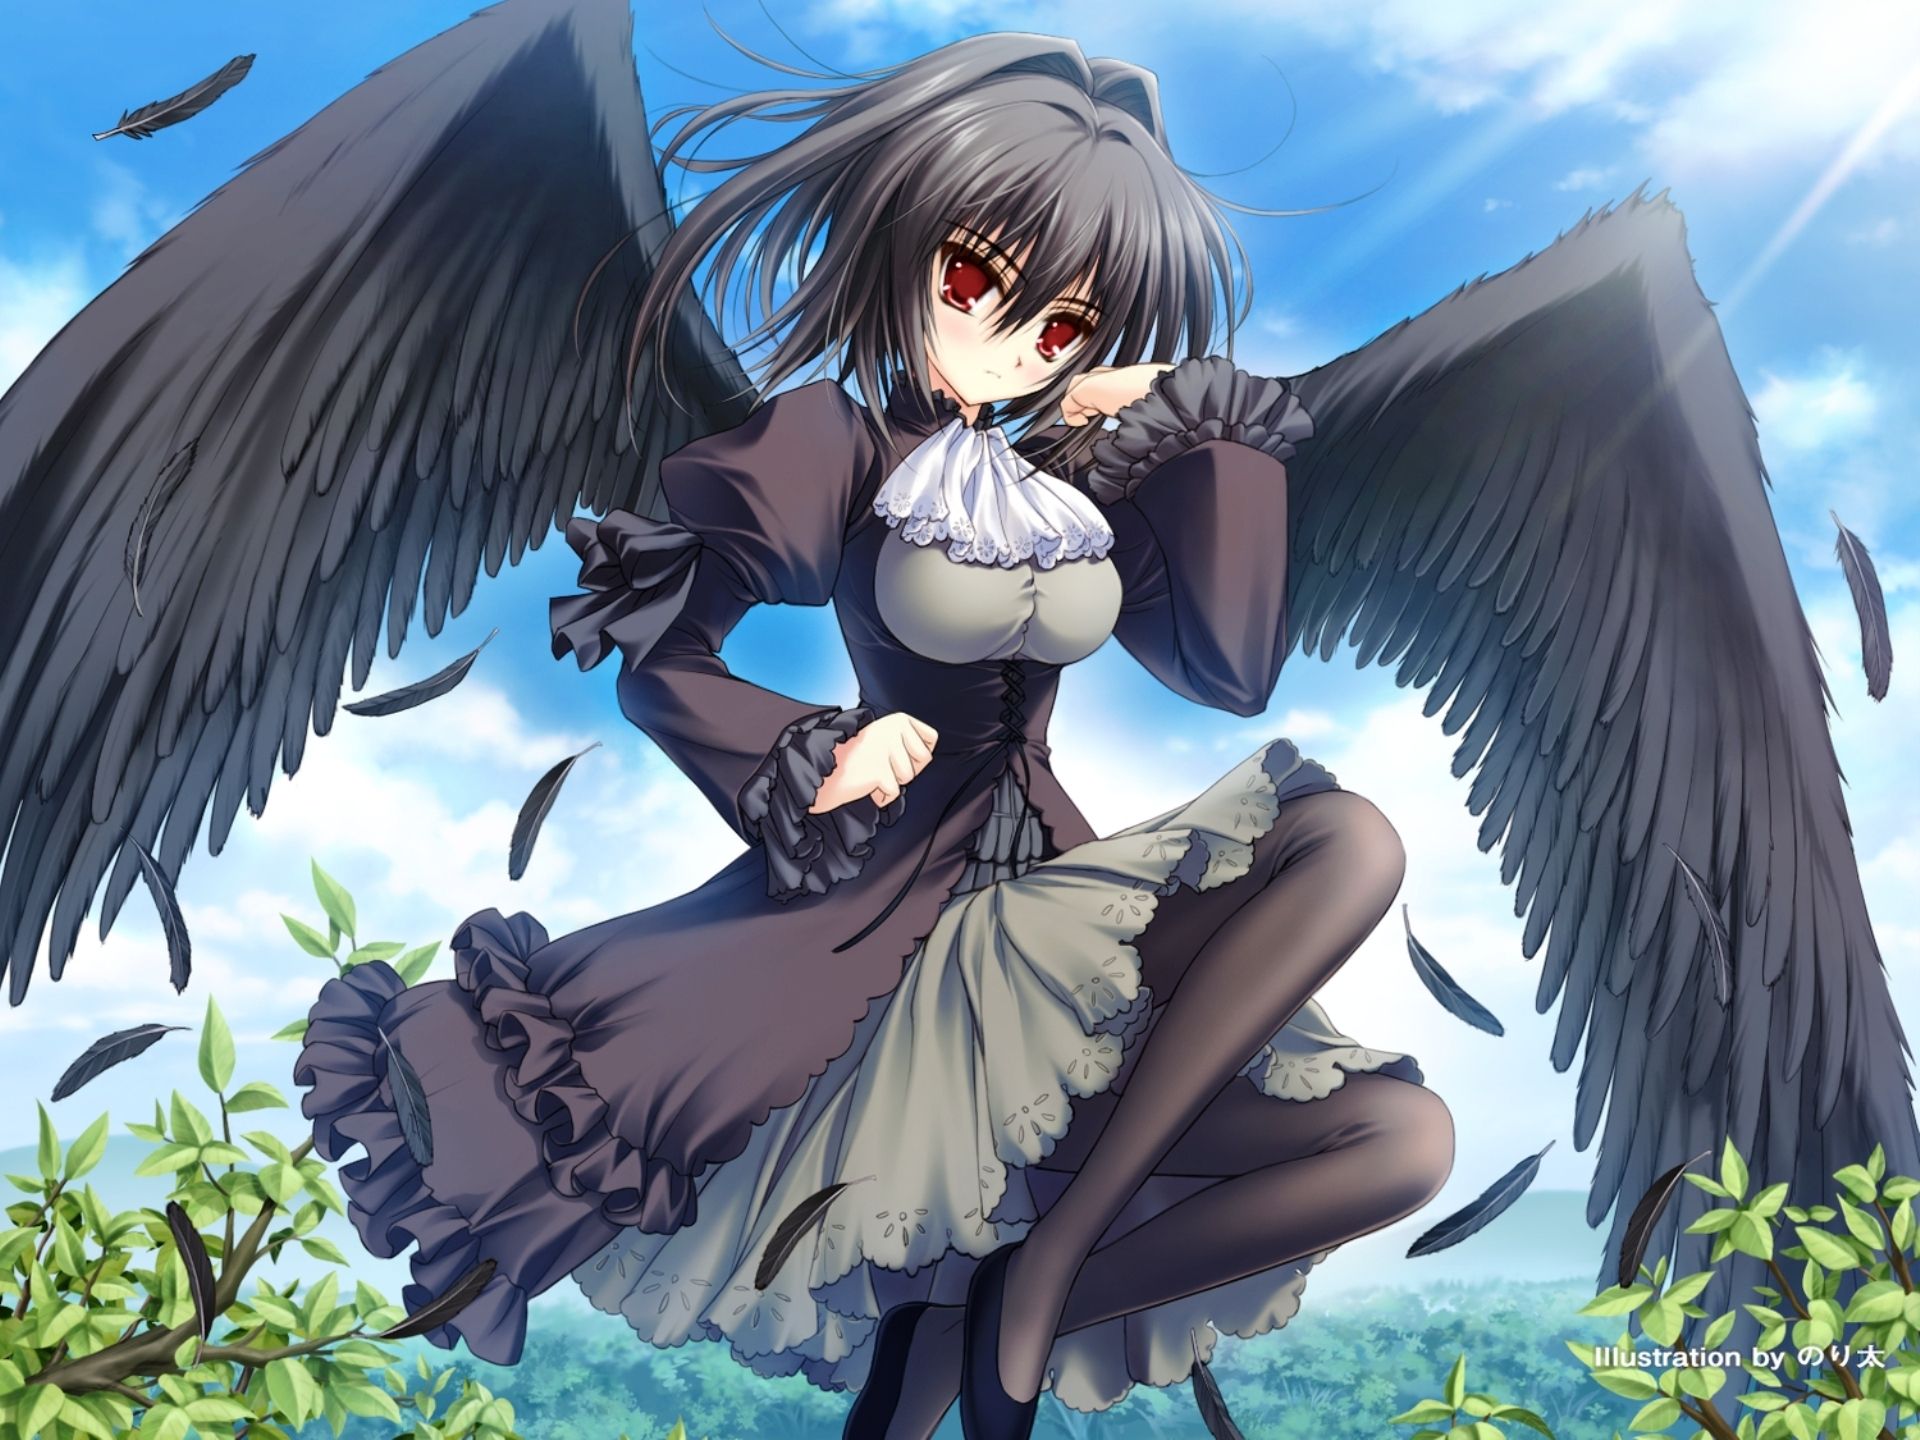 40+ Anime Girl With Wings Iphone Wallpaper Viral - Posts.id